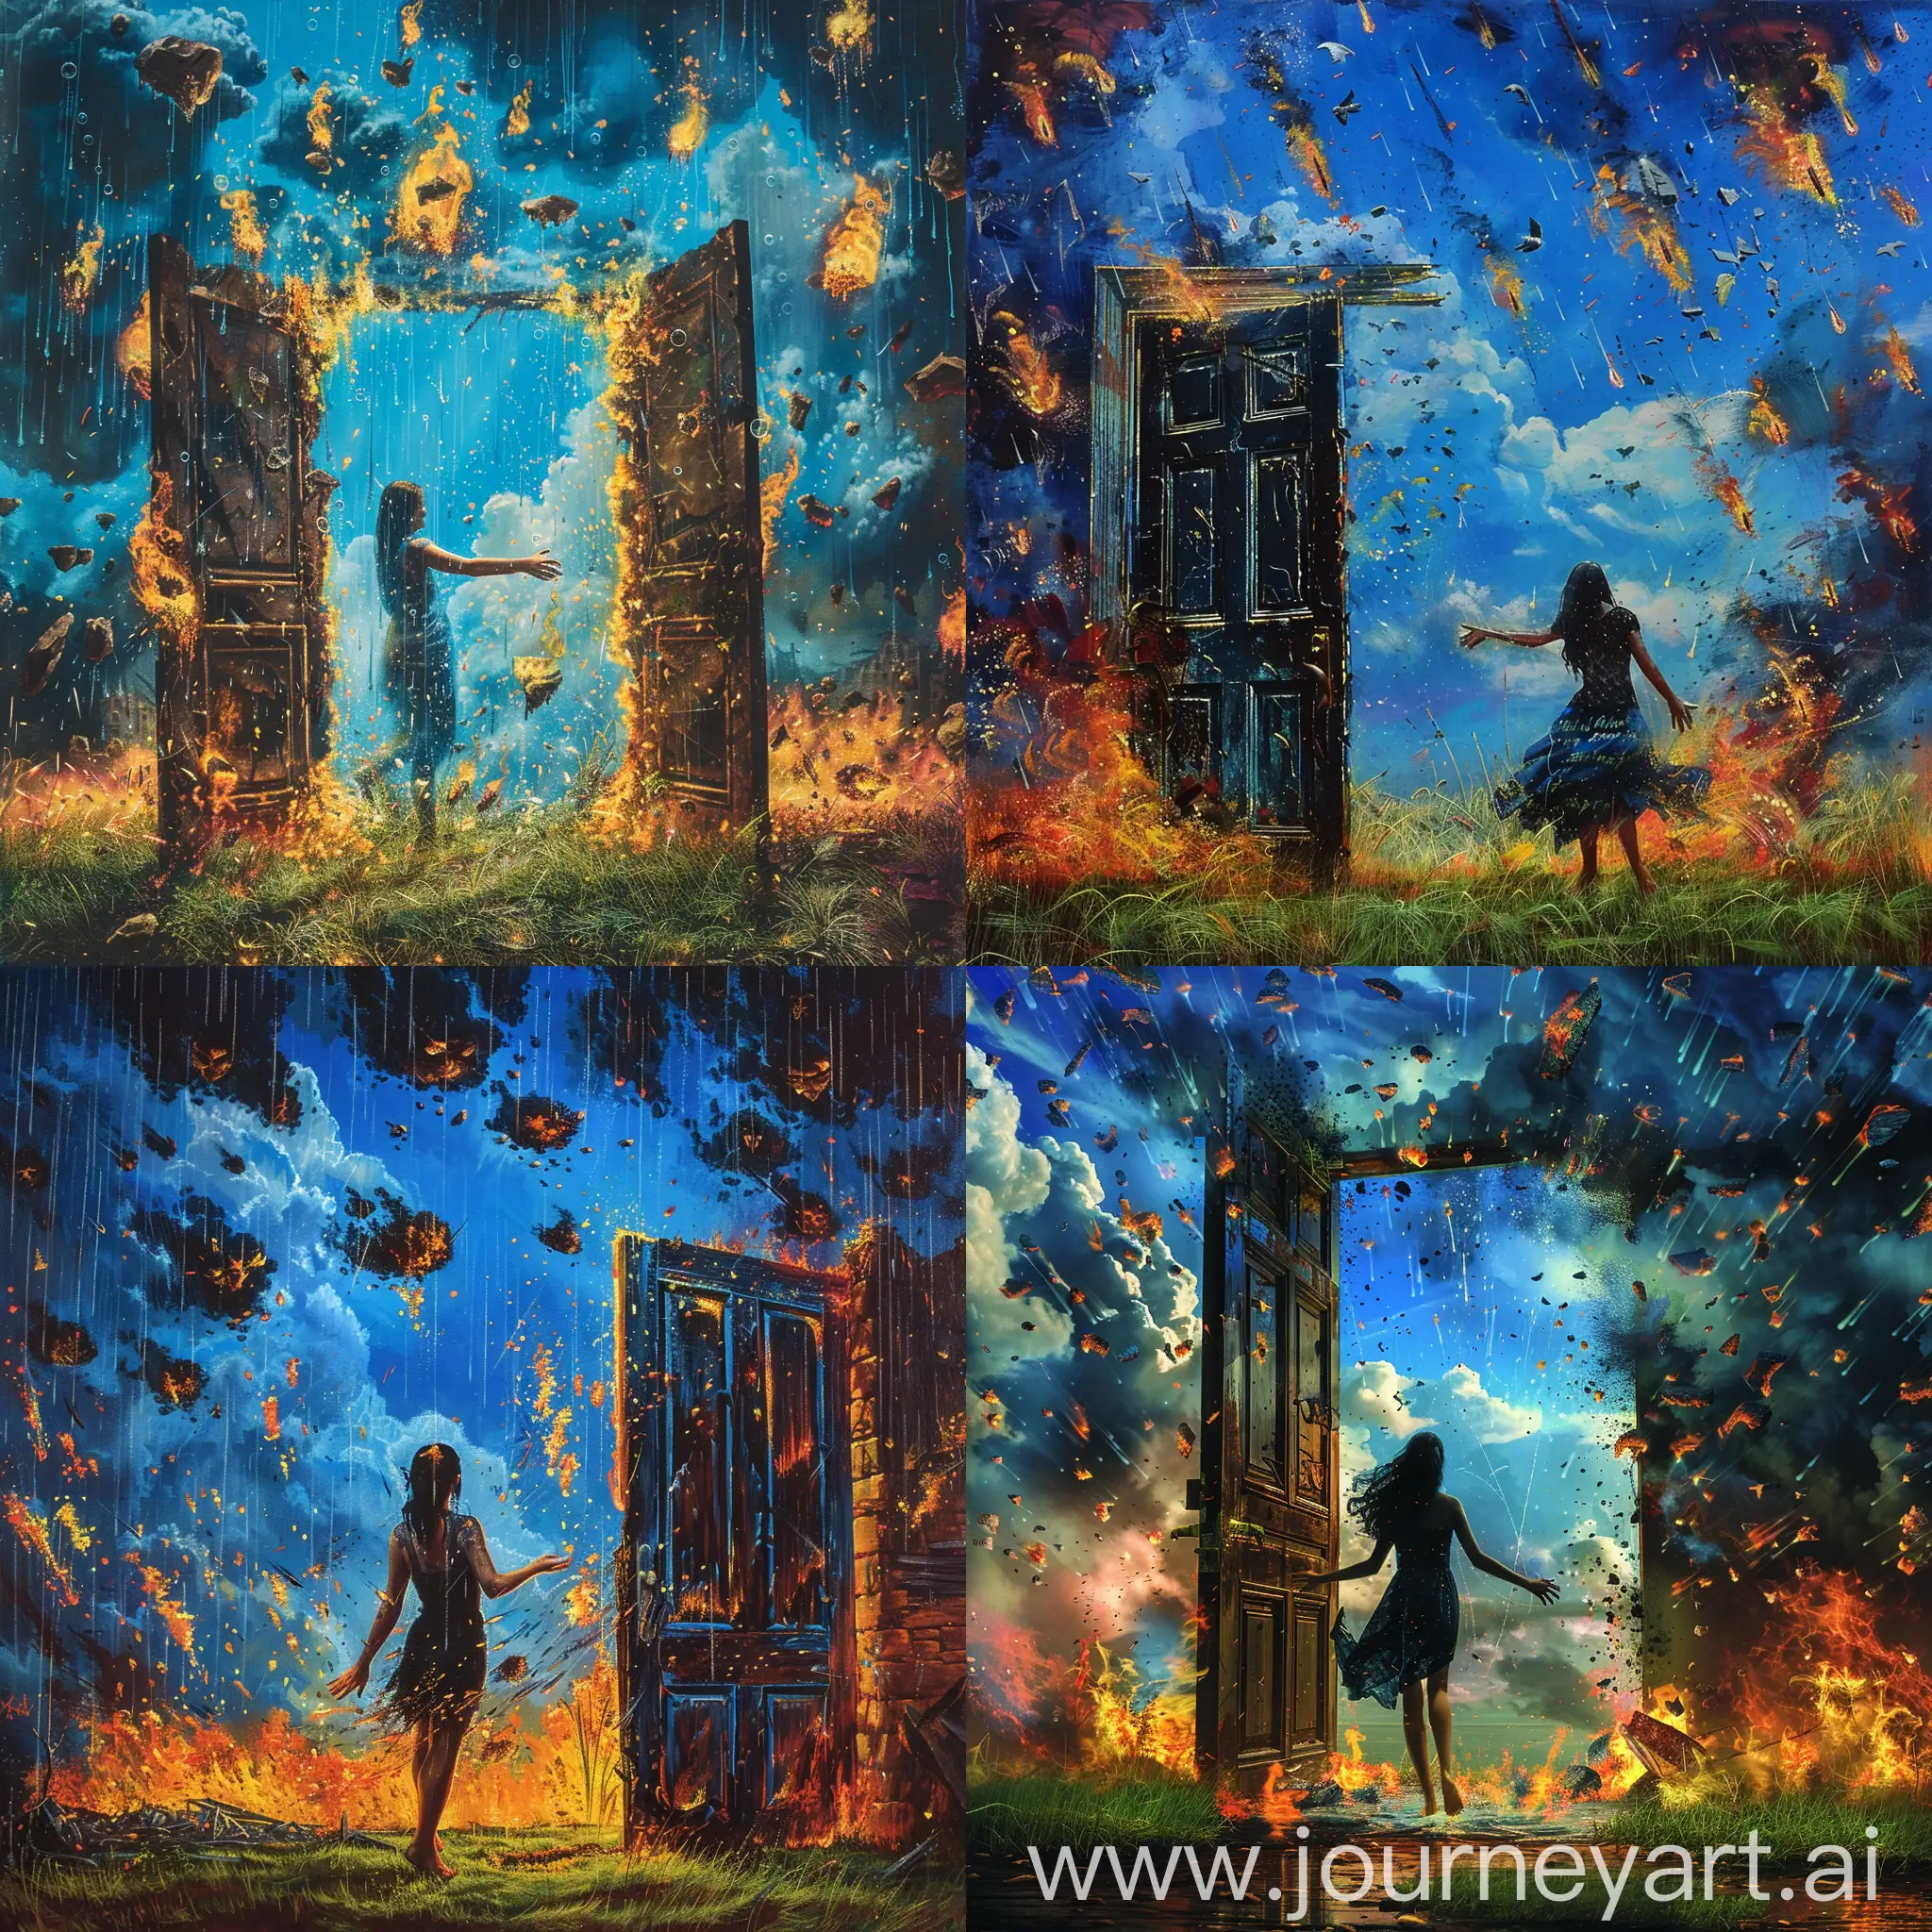 Woman-in-Black-Extends-Hand-through-Doorway-Amidst-Ruins-and-Flames